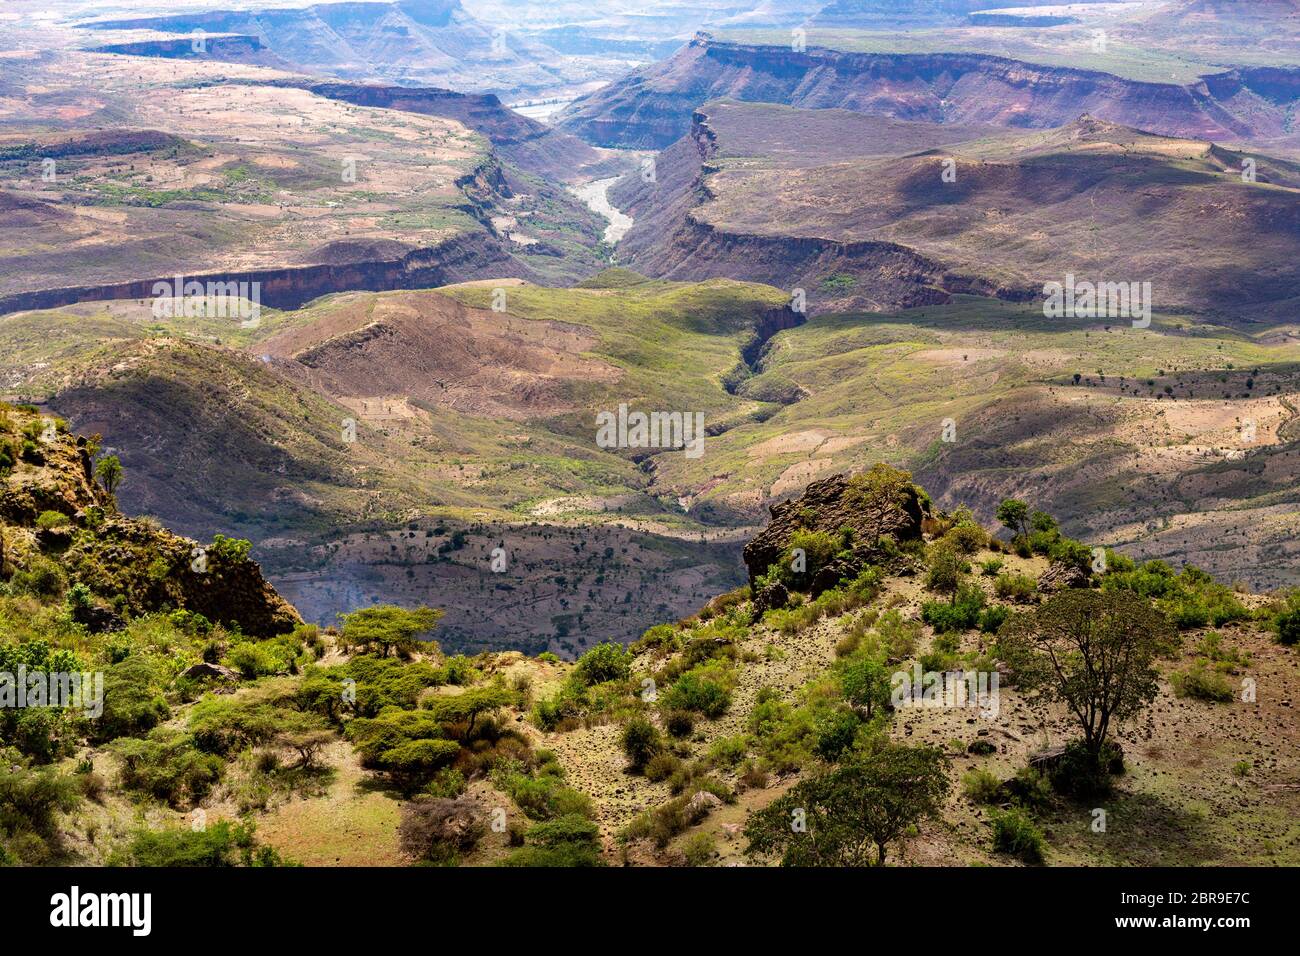 Beautiful mountain landscape with canyon and dry river bed, Somali Region. Ethiopia wilderness landscape, Africa. Stock Photo